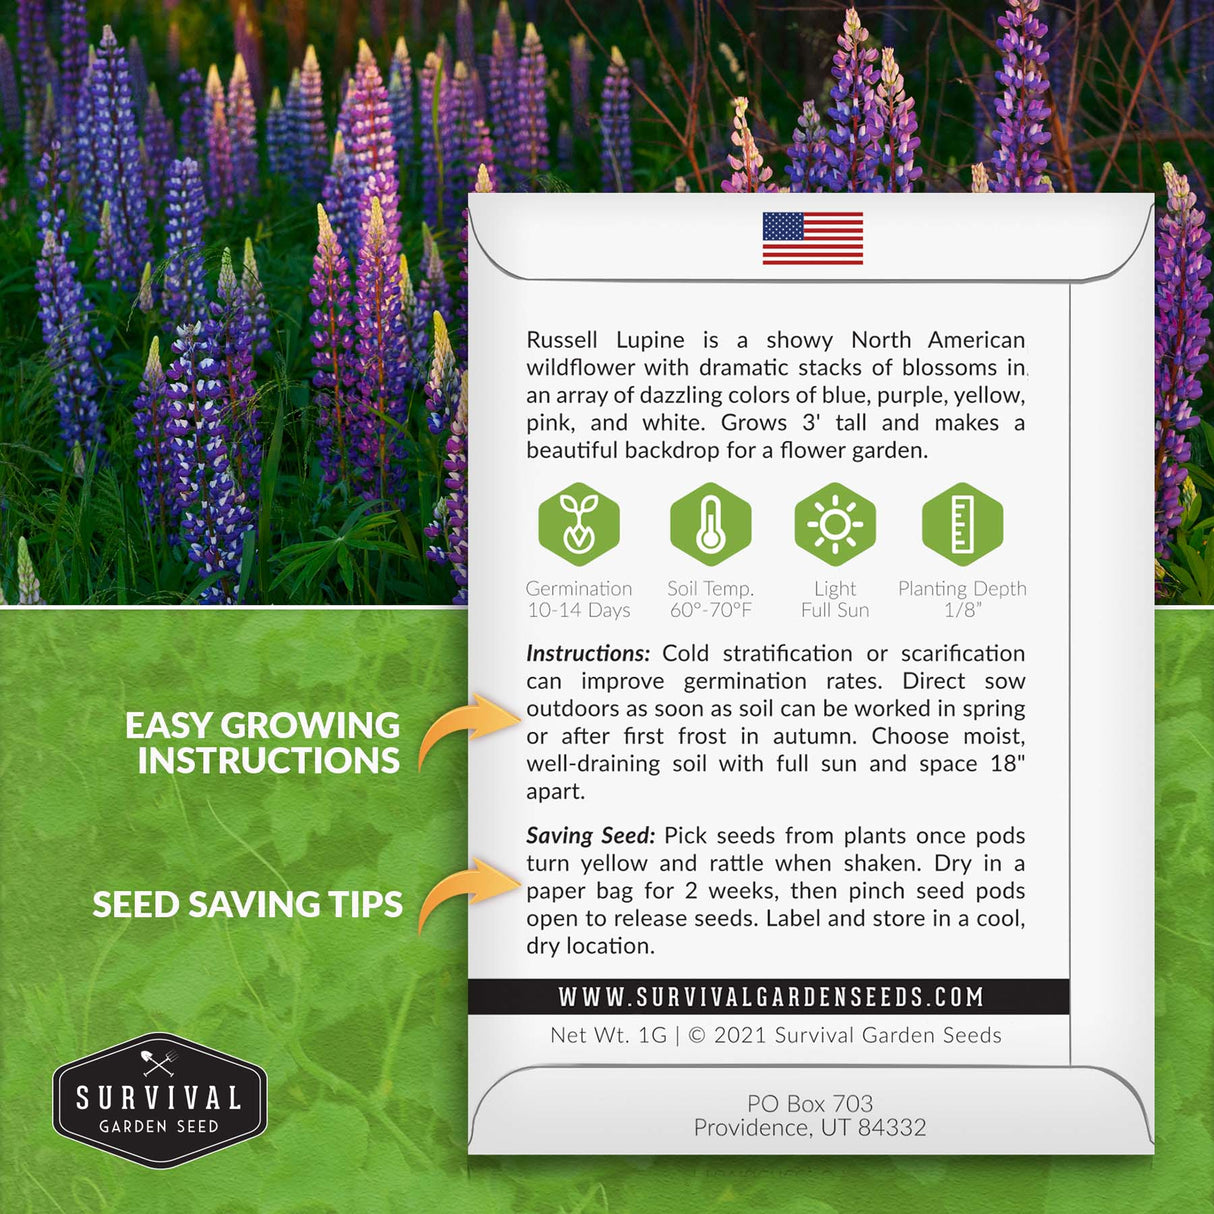 Russel Lupine seed planting instructions